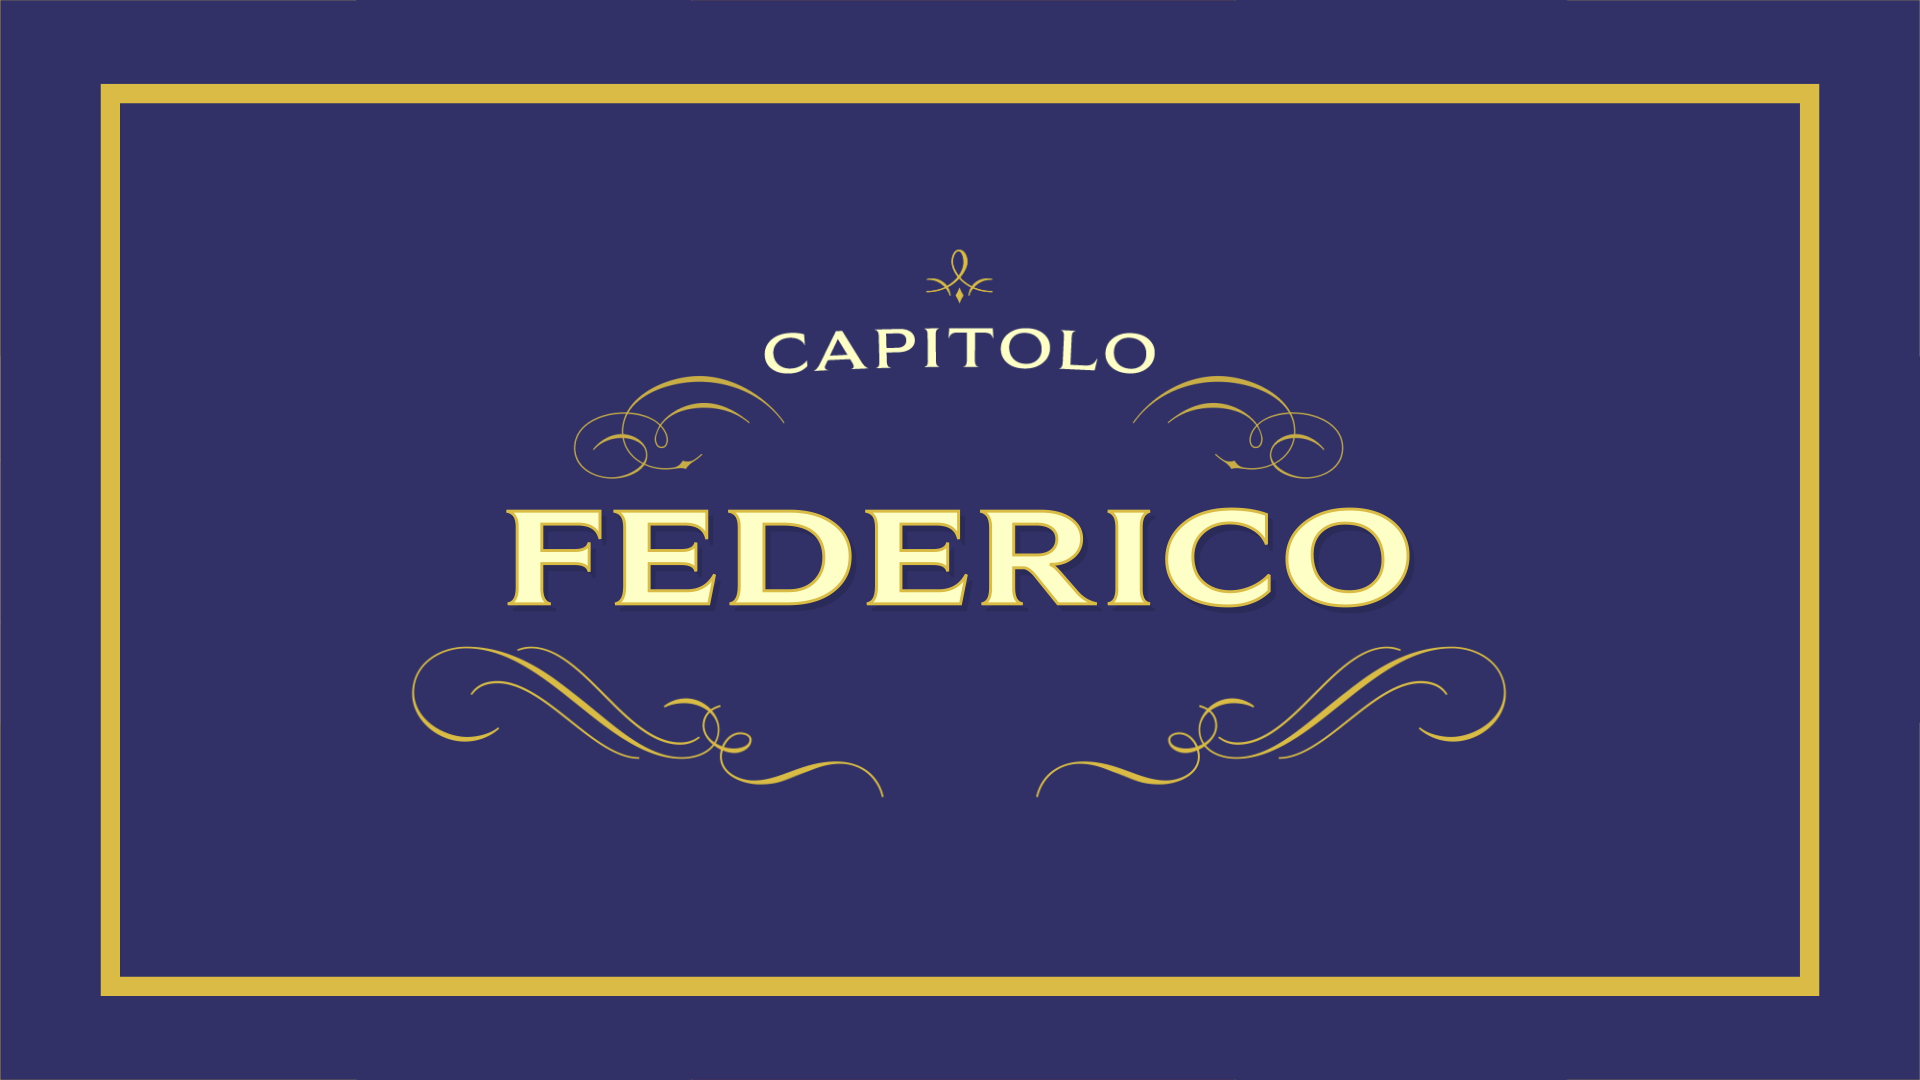 01_FEDERICO 2 (0-00-31-17).png